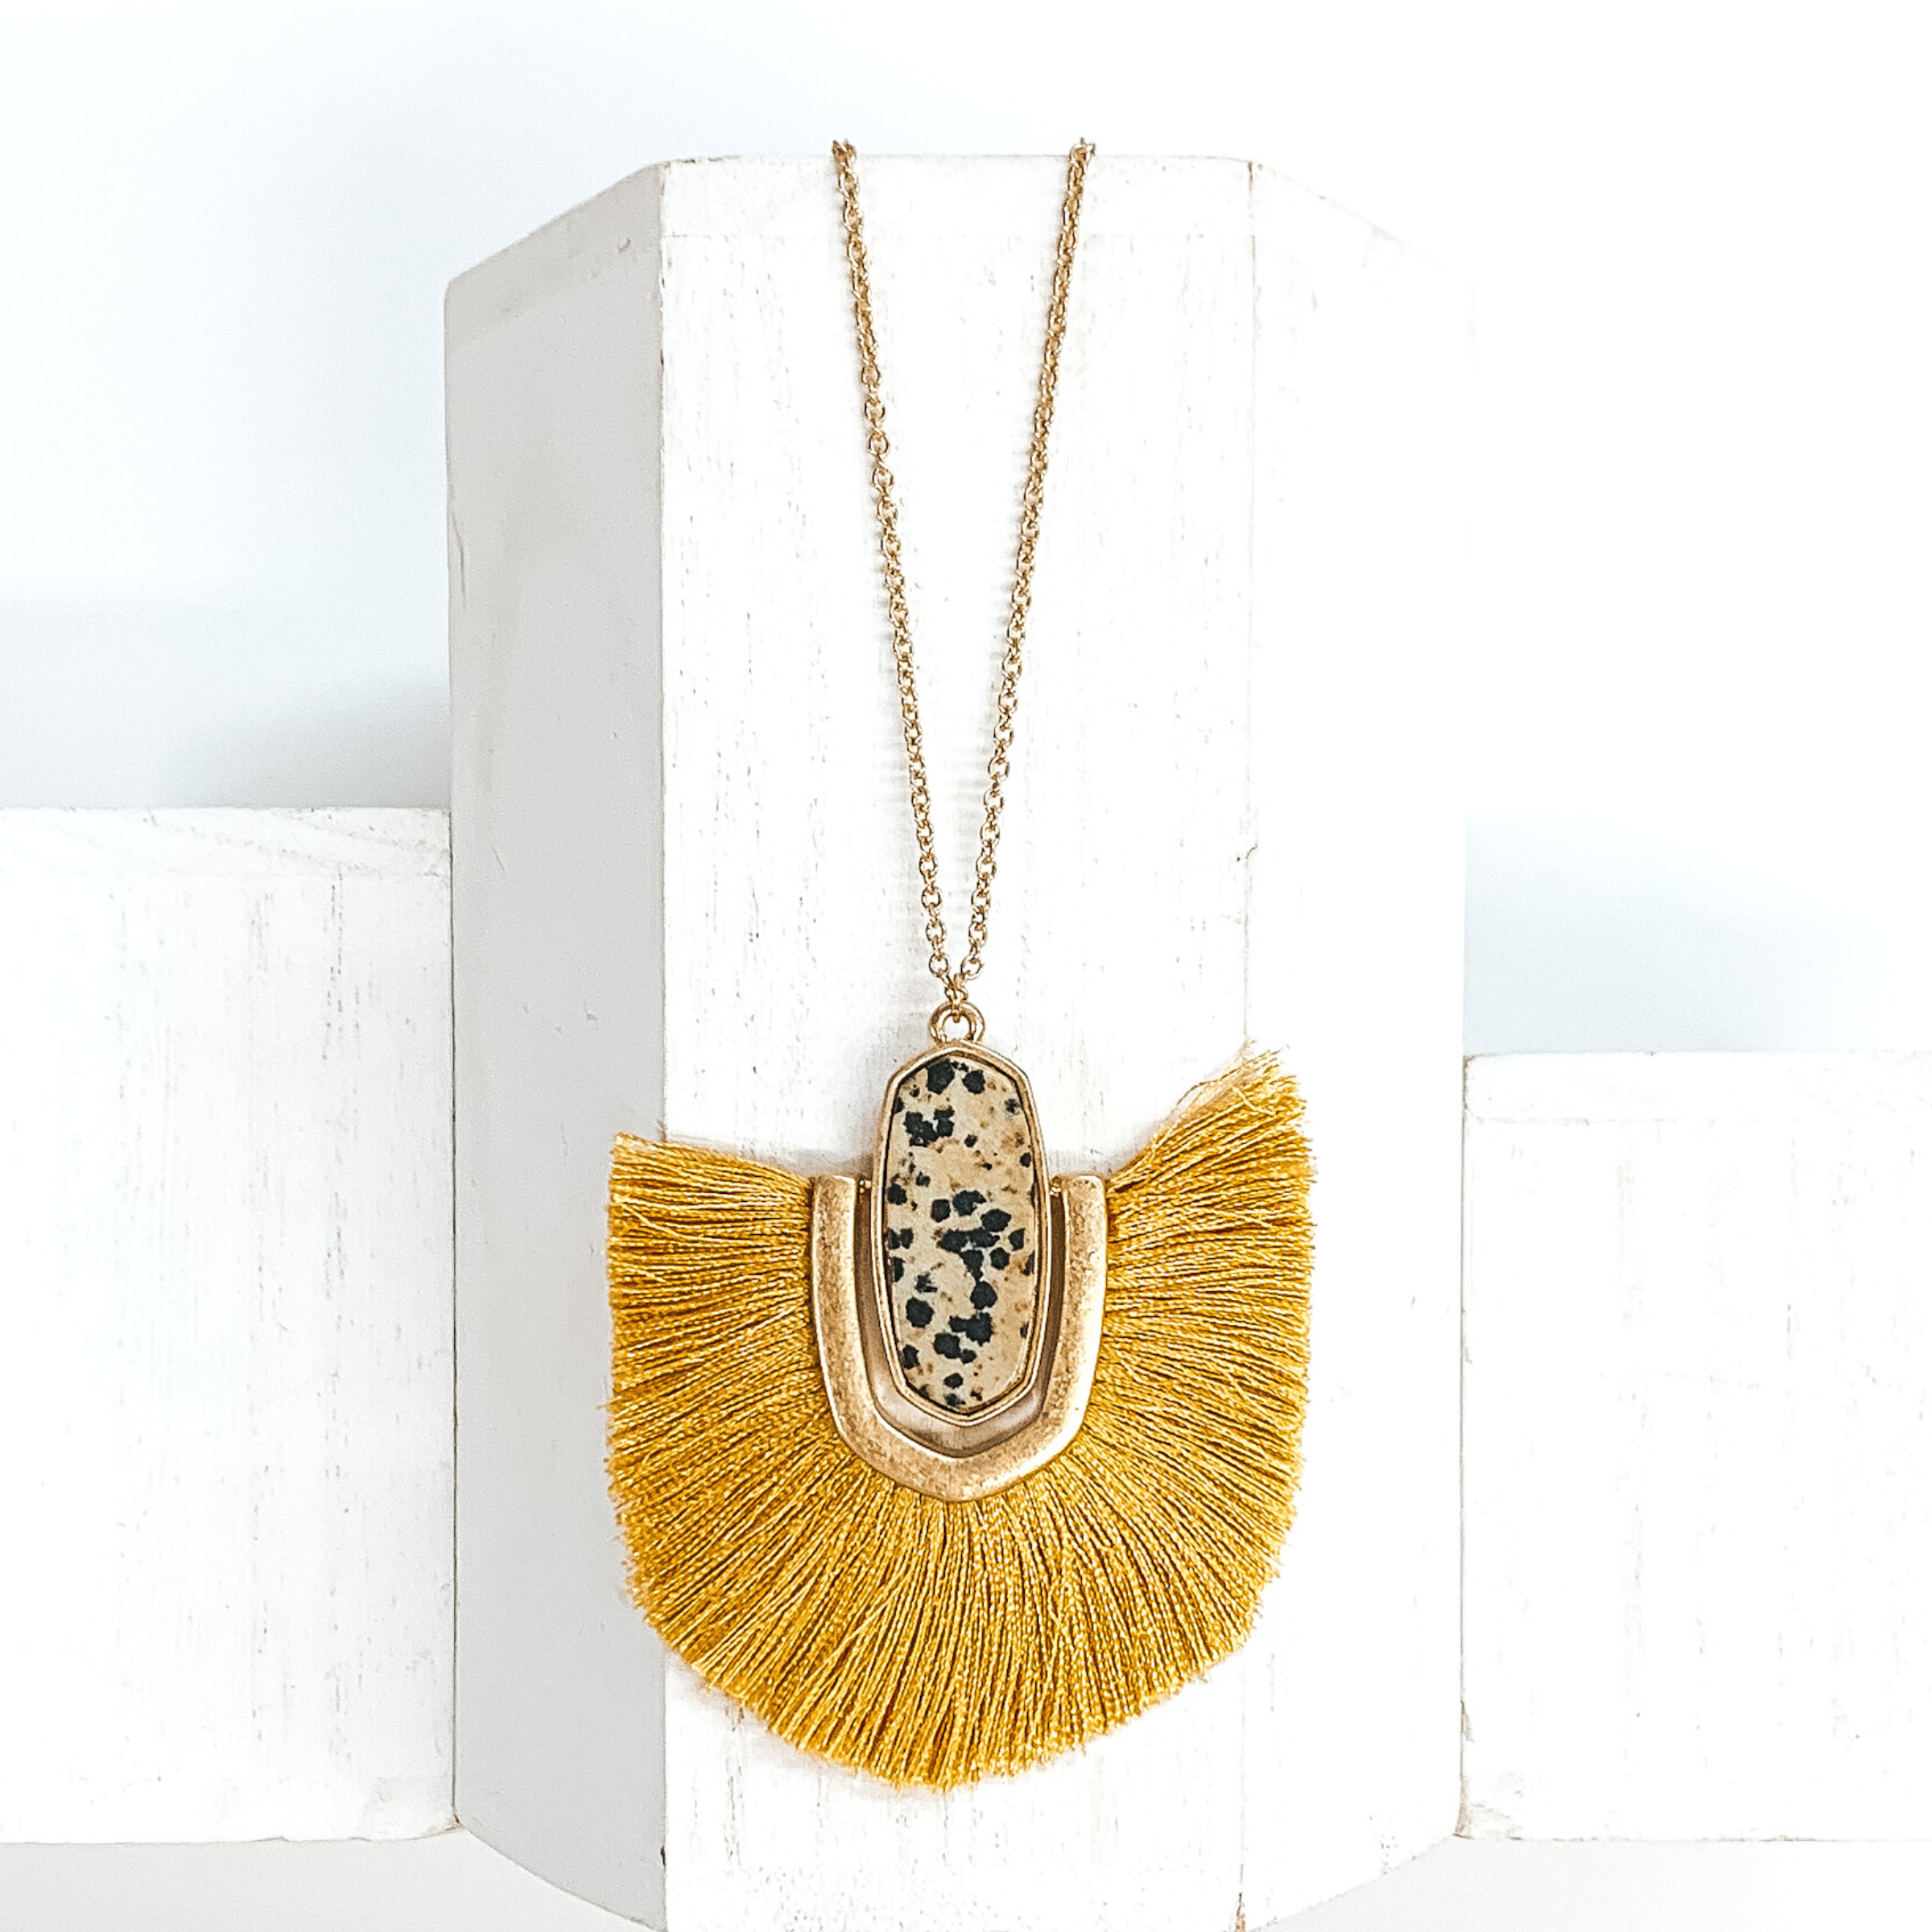 Thin, gold chained necklace with an oval shaped beige stone with black dots pendant that has a half oval gold accent connected at the sides that inlcudes yellow fringe. This necklace is pictured on a white block on a white background. 